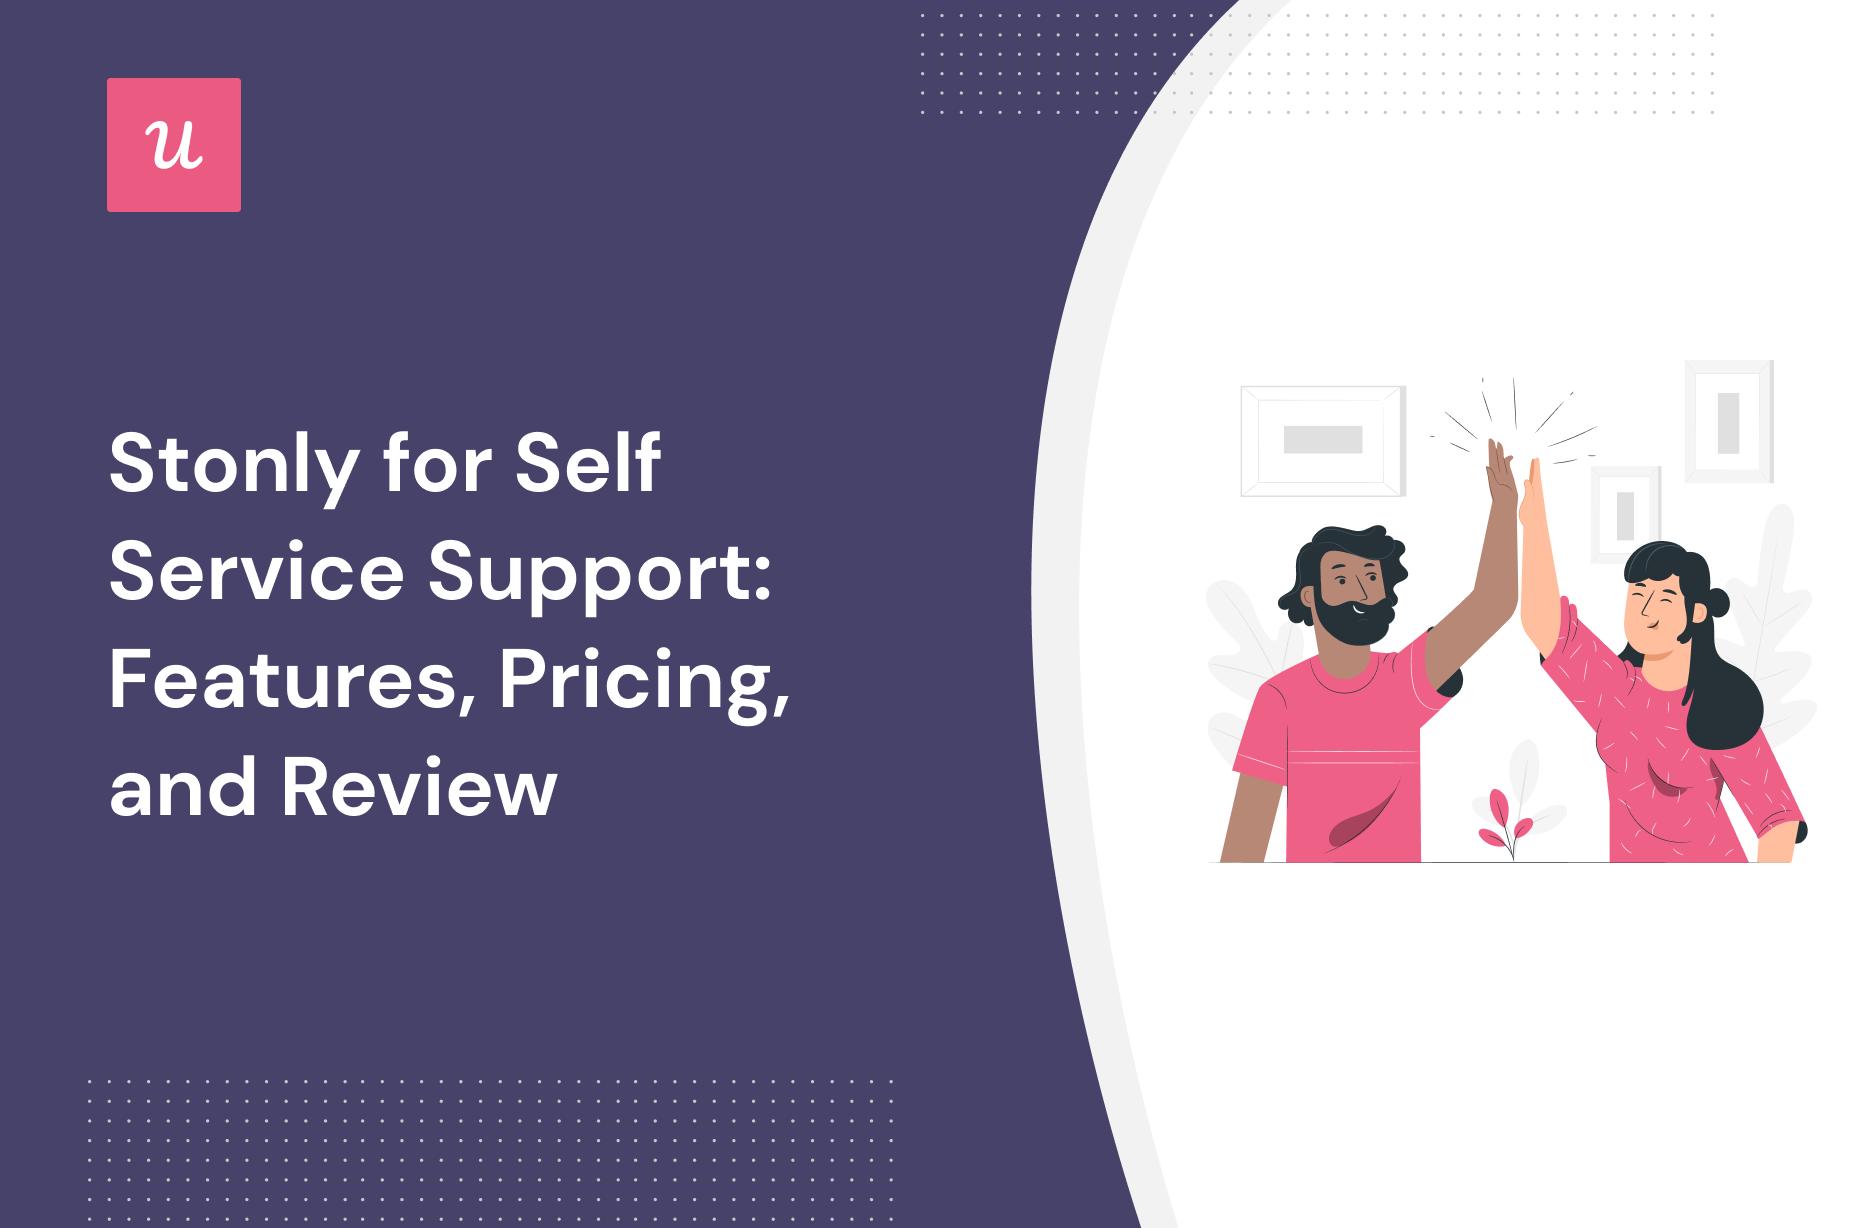 Stonly for Self Service Support: Features, Pricing, and Review